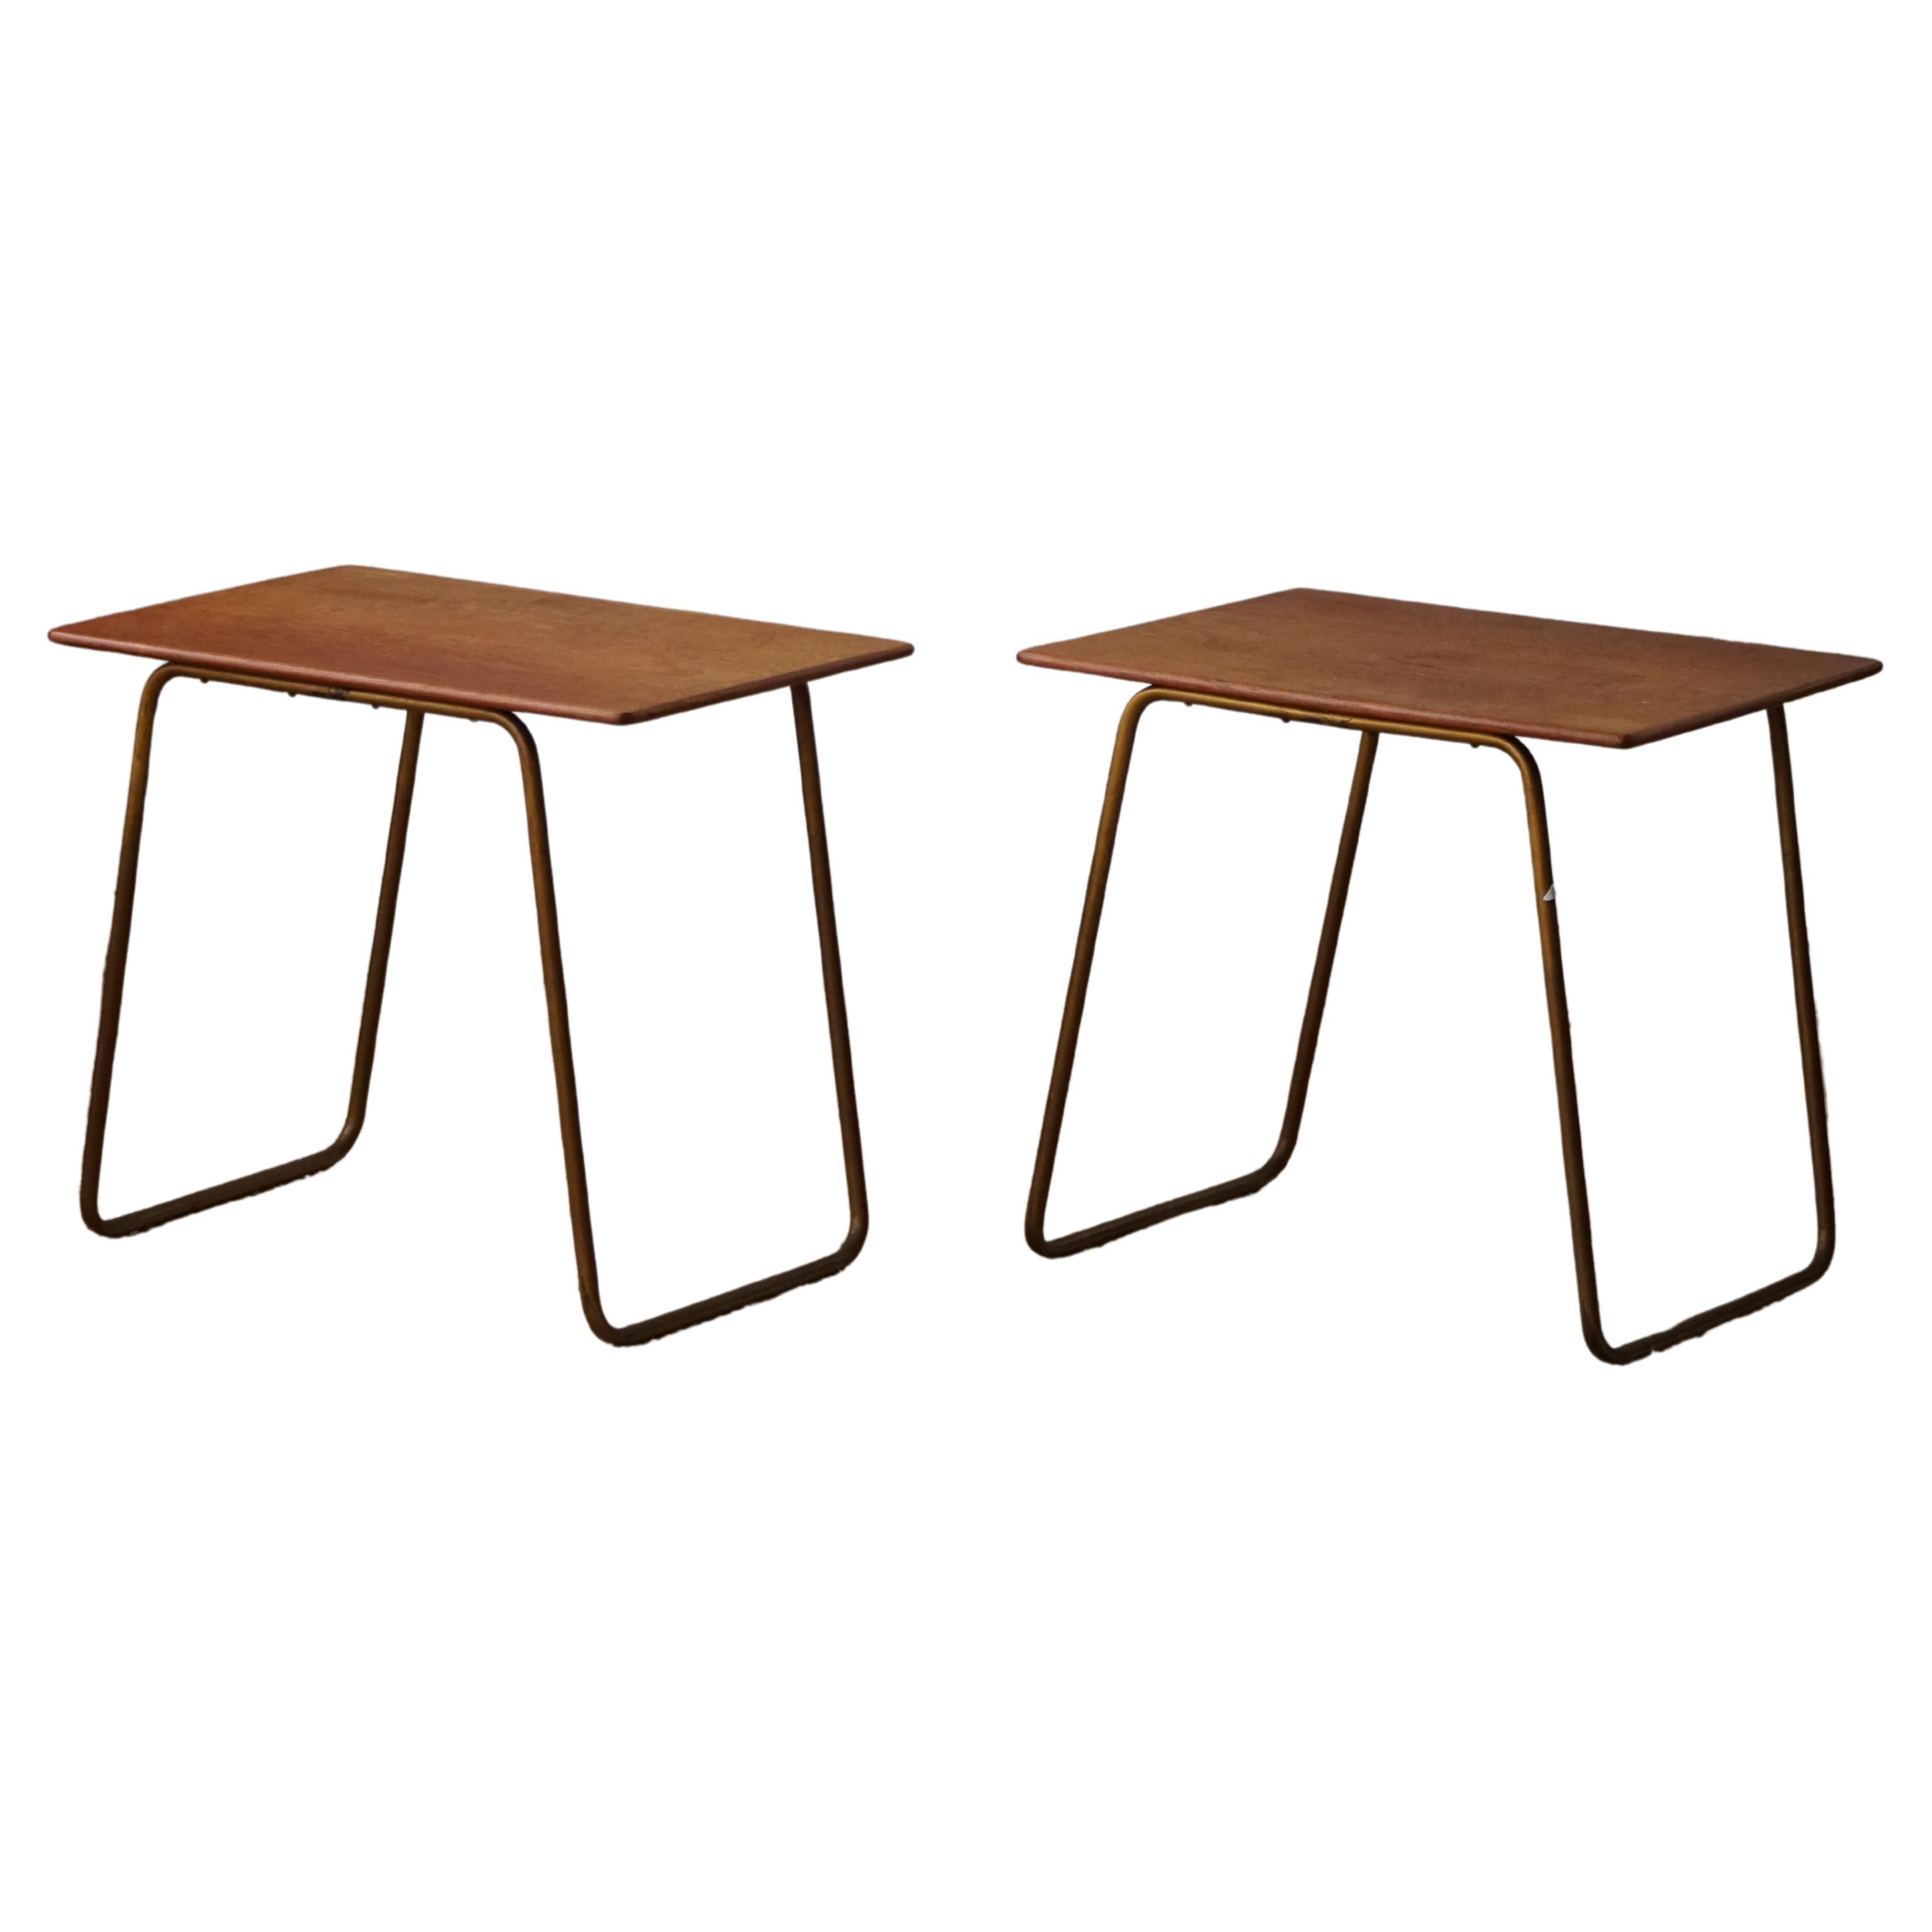 Pair of Side Tables in Teak and Steel, Danish Mid Century, 1960s For Sale